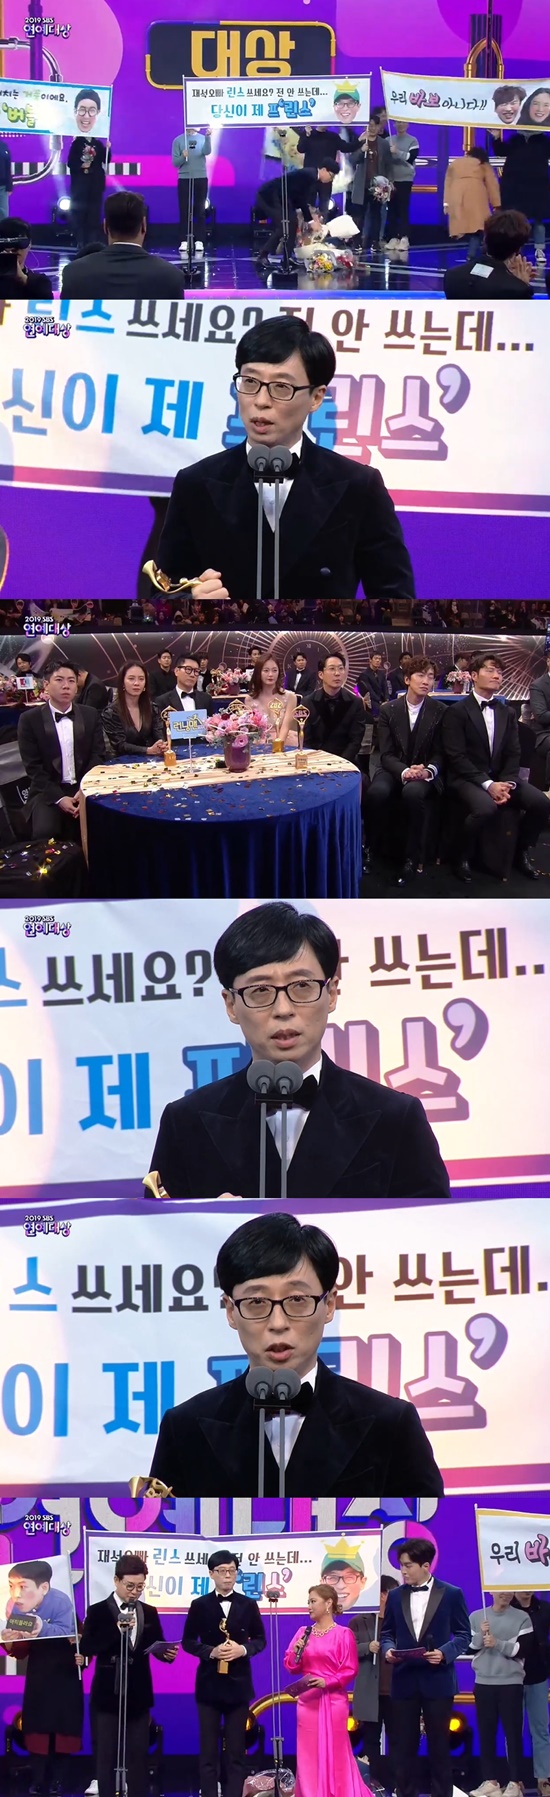 Yoo Jae-Suk won the 2019 SBS Entertainment Grand Prize Grand prize.On the 28th, SBS 2019 SBS Entertainment Grand Prize was released as the main character of Grand prize.This years Grand prize candidate was compressed into Yoo Jae-Suk, Shin Dong-yeop, Baek Jong-won, Kim Gura, Kim Byung-man, Lee Seung-gi, Seo Jang-hoon, Kim Jong-kook.The Grand Prize of Honor went back to Yoo Jae-Suk, which led to Yoo Jae-Suk regaining the Grand Prize in four years.Yoo Jae-Suk, who holds the trophy, said: Thank you so much, Running Man is finally becoming a tenth anniversary next year, Ive won such a big prize.When I was interviewing before, I said that if I received a Grand Prize, I would like to receive it with the members of Running Man, but I am grateful, thankful and sorry that I have received a big prize alone. I would like to express my gratitude first, and I would like to express my gratitude to my parents, my father-in-law, Jiho, Naeun, and my beloved Na Kyung-eun.In addition, he said, I sincerely thank the production team. He also expressed his gratitude to the members who have been together for 10 years.Ive been through a lot of hard times, but Im so grateful to be back together and sweating, I also thank the fans who care, he said.We are celebrating 10 years next year and we have homework as well.I will try to develop a lot of myself.  When I suddenly came here today, I think about Mr. Kuhara and Mr. Sully who appeared as guests in Running Man.I hope you two will do what you want to do in heaven. I would like to express my gratitude to you both. Yoo Jae-Suk said: I think I appreciate the ordinary day-to-day routine these days, thank you to many people for letting me spend my precious daily life.I would like to say that you will be happy for the new year rather than a long story.  I do not know how it will change next year, but I will be able to pioneer the way that others do not go and become a program that will create a new entertainer. He said, I hope that more entertainers will enjoy this place next year.Lee Seung-gi won the producer award and Baek Jong-won won the achievement award.Lee Seung-gi said, I thought the four awards would be over, but I am grateful for the prize. I have also grown up in SBS entertainment, and I am glad to be able to participate in the awards ceremony and program every year.Baek Jong-won, who won the trophy, gave a bright smile and thanked him: I dont know if I deserve it.Besides me, a lot of people tried to make fun of last year. I think I should try harder.I will do my best to give support to SBS and the audience and the people in a narrow way. Finally, Baek Jong-won added, I will work hard to reach it. I hope that self-employed, farmers and fishermen will be able to work hard.Kim Jong-kook and Hong Jin-young won the Grand Prize in the reality show category.The best awards in the show variety category were Kim Seong-jooo and Choi Sung-kuk, respectively.Hong Jin-young said, I did not know that I would actually receive such a big prize. I really appreciate it.Kim Jong-kook said, As soon as I received the best award, I thought I should do burning youth.First of all, Choi Sung-joo said, I will make the acceptance impression realistic. Kim Seong-joo said, Thank you Choi Young-in.Baek Jong-won, who plays the role of PD and plays the role of a non-entertainer, always tells me, Do not think about it from your point of view, whether you are doing business or broadcasting, but think about it from your audience and viewers.I am so grateful, he said to Baek Jong-won.Choi Sung-kuk laughed, saying, I dwell on the prize, so Im going to show off for a while. He conveyed his friendship to members of the Burning Youth.Kim Hee-chul and Yoon Sang-hyun received the Excellence Prize in the reality show category.In the show variety category, Yang Se-chan and Lee Sang-yoon became the main characters of the Excellence Prize.First of all, Kim Hee-chul showed his gratitude to the production team of Mirror Bird and Mattan Square.I really respect my brother Kang Ho-dong, Ill learn a lot, Kim Hee-chul said.I thought it didnt fit well with the entertainment, but the crew of Dongsangmong 2 really helped me, so I think my family is well.He conveyed his affection to his daughters, as well as a message of affection for his wife, I love Mabi, who will not change my mind until I die.Yang Se-chan said, Its been three years since I came in Running Man, and I did not play much.But this time, I got this award, he said, I want to say thank you to my brother. Lee Sang-yoon said, I do not know if I can get an excellence prize. The production team preparing for this is more troubled.I want to say thank you to the production team. Choi Min-yong, a burning youth, and Jung In-sun, a Baek Jong-won alley restaurant, won the prize for the new female newcomer.Jung In-sun, who was the first to receive the trophy, gave a happy smile and gave a speech.I think I have given you to work hard because you are not enough yet, he said. I am really grateful.Thank you all for your seniors, Mr. Baek Jong-won, and Mr. Baek Jong-won also smiled brightly at his award.Choi Min-yong said, I thought you were one of the candidates when I first called my name. I did not know I was going to receive the award.I am now forty-four years old, and I am working as the youngest in a program, and I have given me a rookie award that is only once in my life on SBS.I did not know that so many people were together before I did the entertainment program. In addition, Lee Sang-min and Tak Jae-hun, who are active in Miwoo Bird, were selected as the best couple awards, Running Man for the global program, and All The Butlers for the best teamwork award.In addition, Baek Jong-wons alley restaurant proved to be on the rise as it was selected as the best program award.2019 SBS Entertainment Grand Prize list ▲ Grand prize: Yoo Jae-Suk (Running Man) ▲ Achievement prize: Baek Jong-won (Baek Jong-wons Alley Restaurant, Masty Square) ▲ Producer Prize: Lee Seung-gi (Little Forest, All The Butlers Integrated) ▲ Best Award: Hong Jin-young (Ugly Our Little), Kim Jong-kook (Ugly Our Little, Running Man), Kim Seong-jooo (Baek Jong-wons Alley Restaurant), Choi Sung-kuk (Burning Youth) Award: Kim Hee-chul (Ugly Our Little, Mattan Square), Yoon Sang-hyun (Sangmong 2-Youre My Destiny), Yang Se-chan (Running Man), Lee Sang-yoon (All The Butlers Integrated) ▲ Best Program Award: Baek Jong-wons Alley Ceremony The Partys Best Program Award: Sangmyong 2-Youre My Destiny (Reality Show Division), Burning Youth (Show Variety Division) ▲ SNS Star Award: Park Na-rae (Little Forest), Yuk Seong-jae (All The Butlers Integrated), Lee Kwang-soo (Running Man), Kang Nam Isanghwa (Sangmyong 2-Youre My Destiny) ▲ Best Teamwork Award: All The Butlers Integrated ▲ Global Program Award: Running Man ▲ SBS Entertainer Award: Haha (Running Man) ▲ SBS Honorary Temple Award: Yang Se-hyung (Mattan Square, All The Butlers Integrated) ▲ Family Award: Lee Yoon-ji (Sangsangmong 2-You Are My Destiny) ) ▲ SBS Challenger Award: Heo Jae, Lee Tae-gon (Jungles Law), Kim Dong-joon (Matnams Square) ▲ Best Couple Award: Lee Sang-min X Tak Jae-hun (Ugly Our Little) ▲ Broadcasting Writer Award: Wonju Won (The Romantic Age of Choi Baek-ho), Park Eun-young (The Real Entertainment Night), Kim Eun-young Unknown writer (Dongsangmong 2-Youre My Fate) ▲ Radio DJ Award: So Yi-hyun (The Way to Home, So Yi-hyun), Bae Seong-jae (Ten of Bae Seong-jae) ▲ Womens Rookie Award: Jung In-sun (Baek Jong-wons Alley Restaurant) ) ▲ Male Rookie: Choi Min-yong (Burning Youth)Photo = SBS Broadcasting Screen